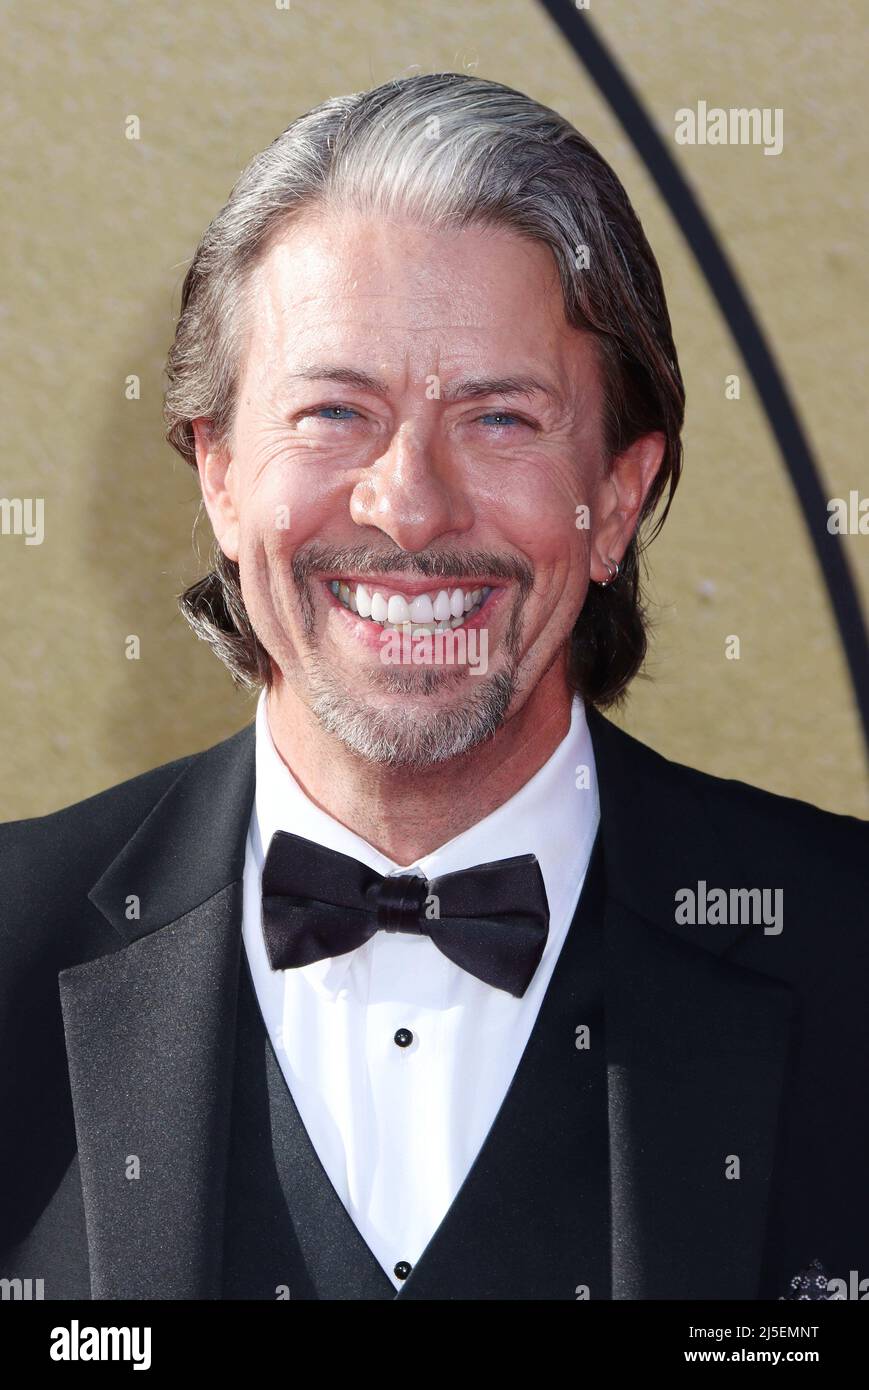 Sean Frye  2022/04/21 The 40th Anniversary Screening of “E.T. the Extra-Terrestrial” held at TCL Chinese Theatre in Hollywood, CA. Photo by K. Hirata / HNW/ PictureLux Stock Photo